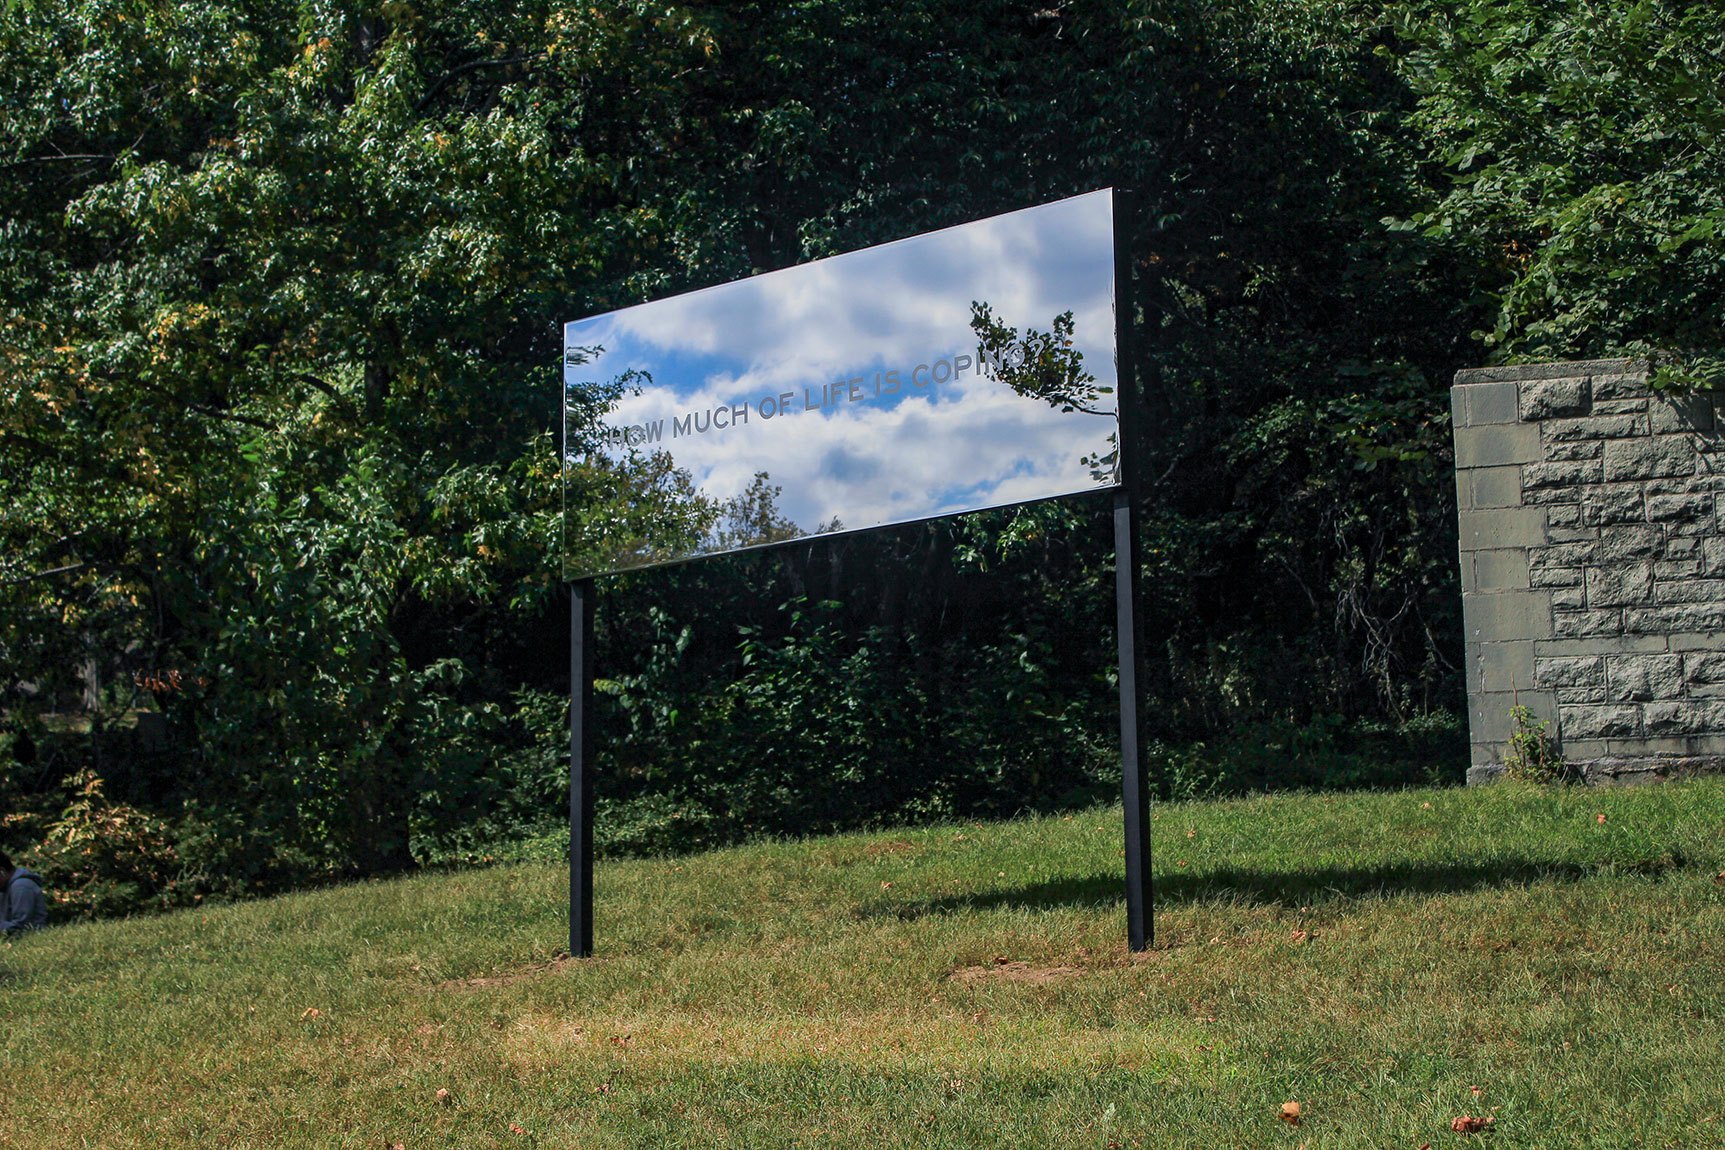 Chloë Bass' mirrored steel piece "How much of life is coping?" installed on a grass hill.